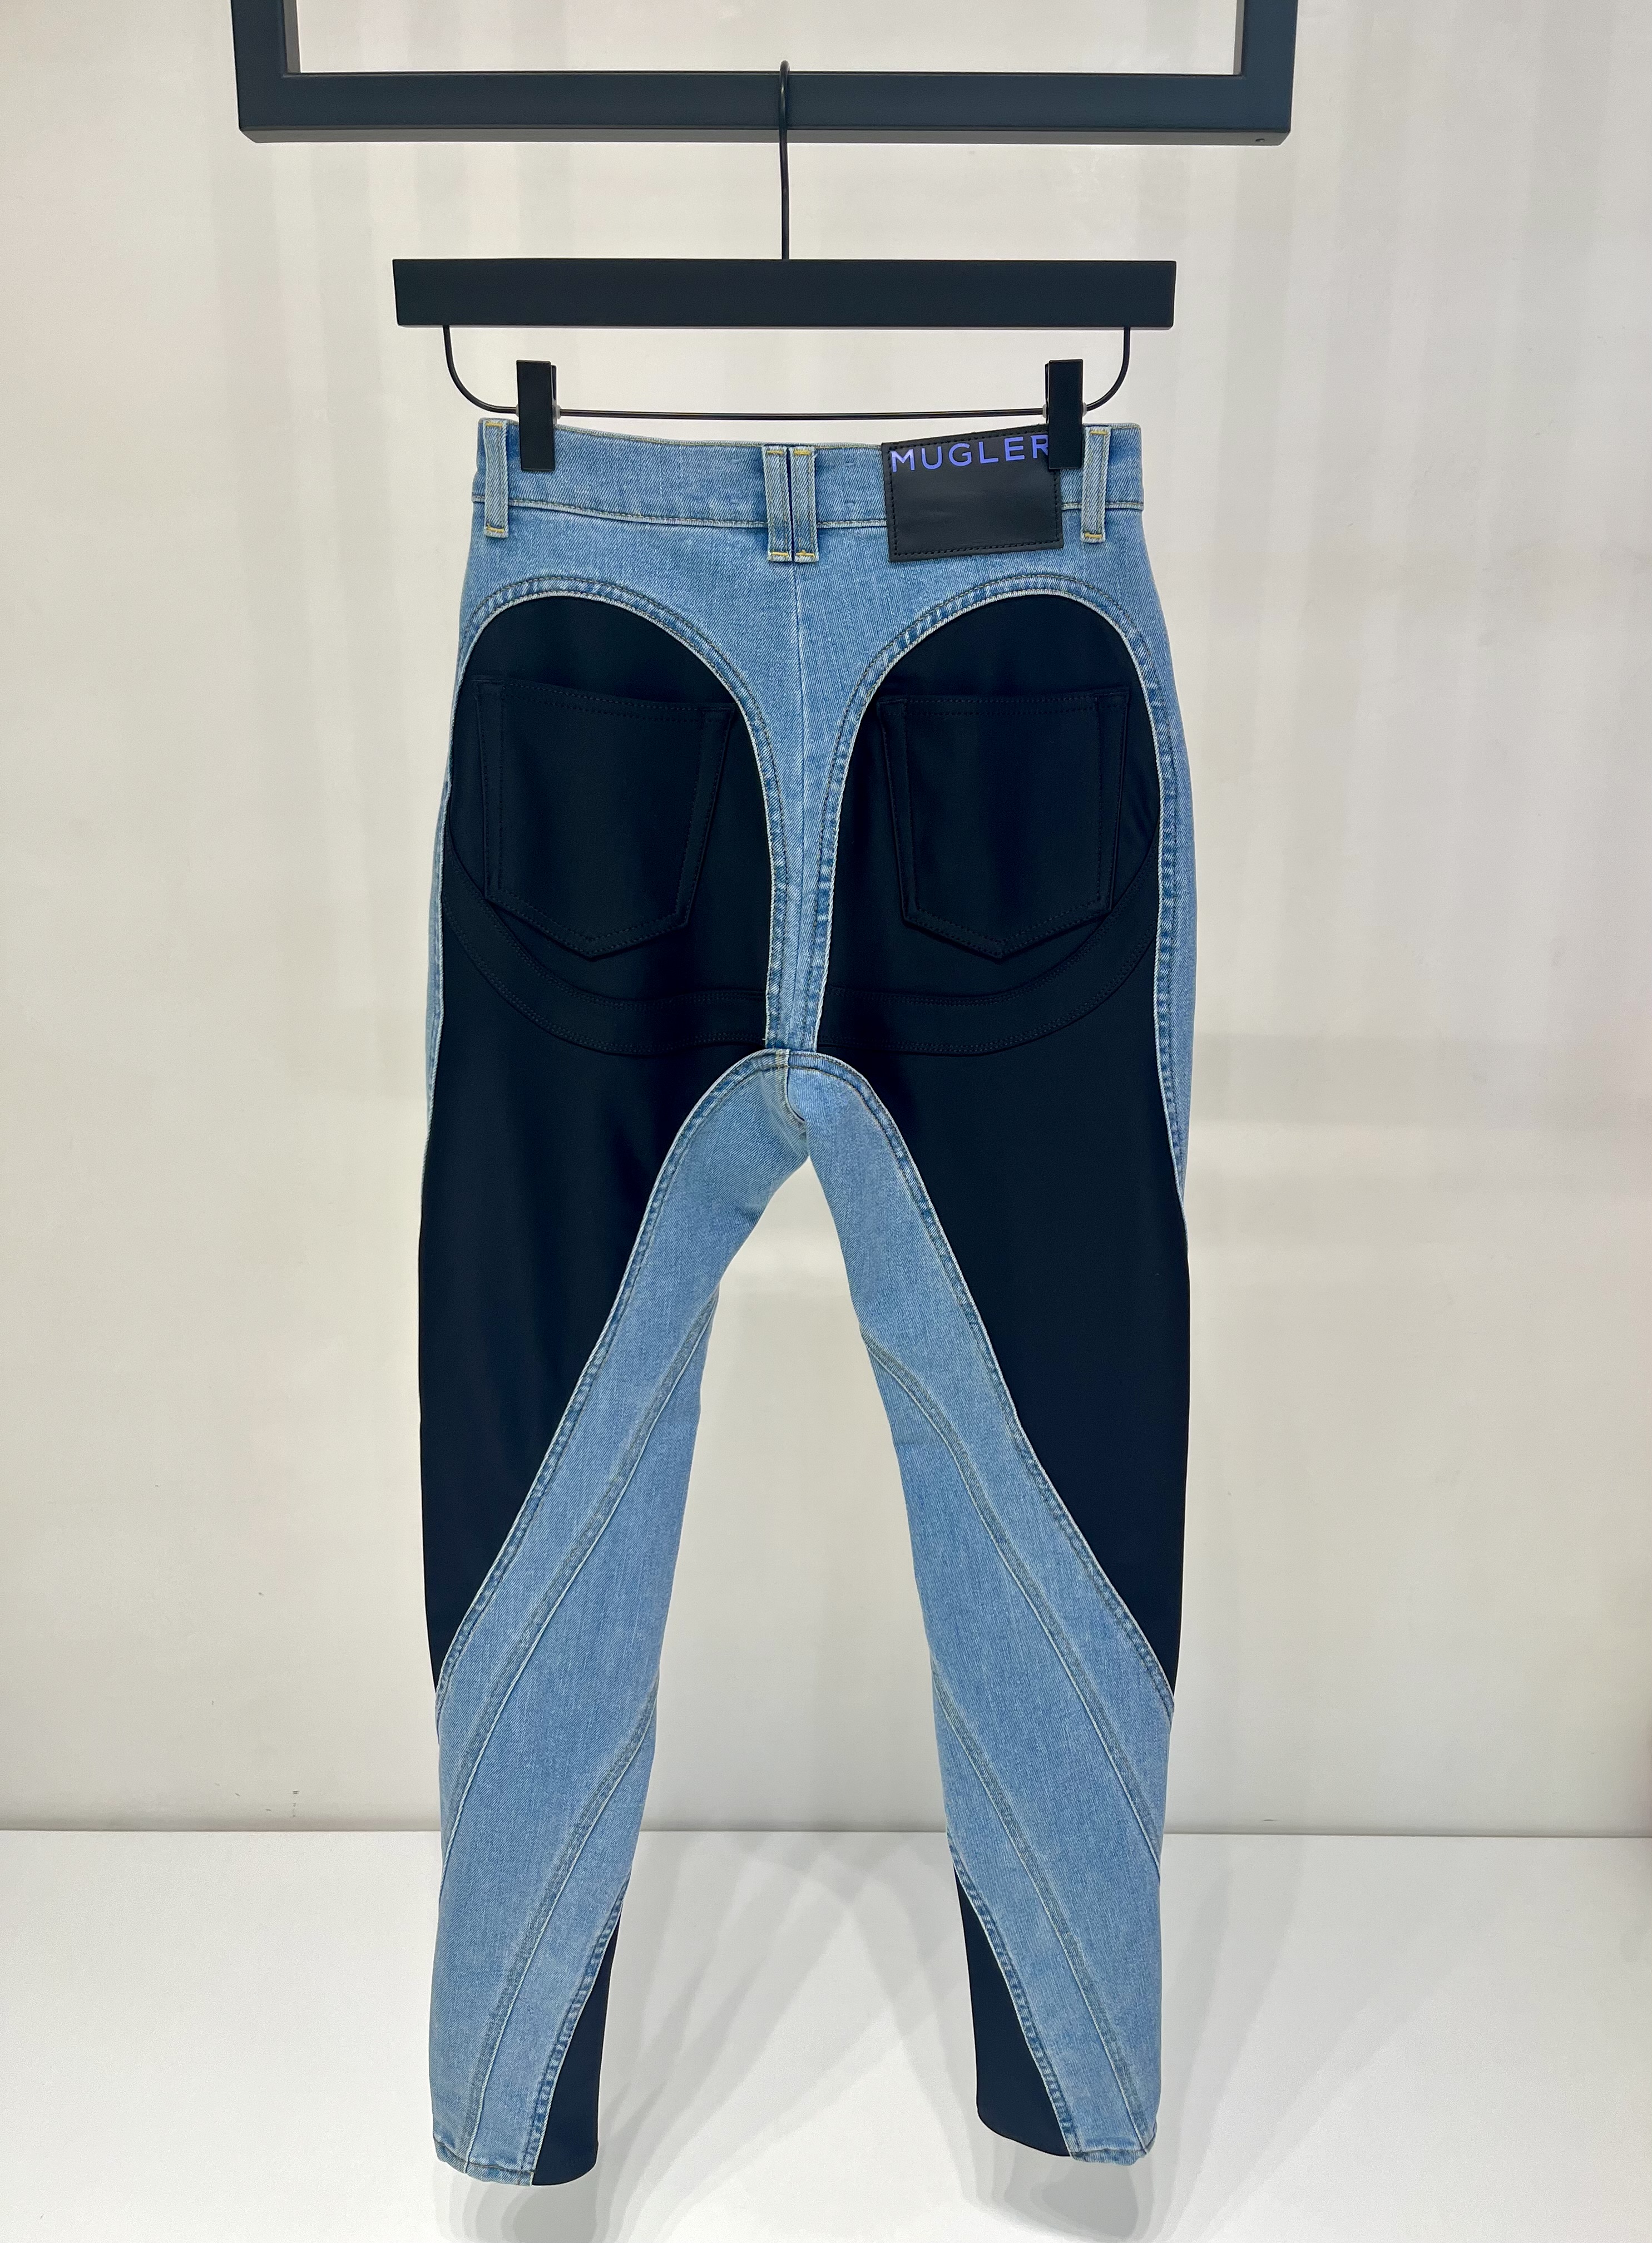 Women :: Clothing :: Mugler x H&M Spiral-panel jeans - The Real Luxury